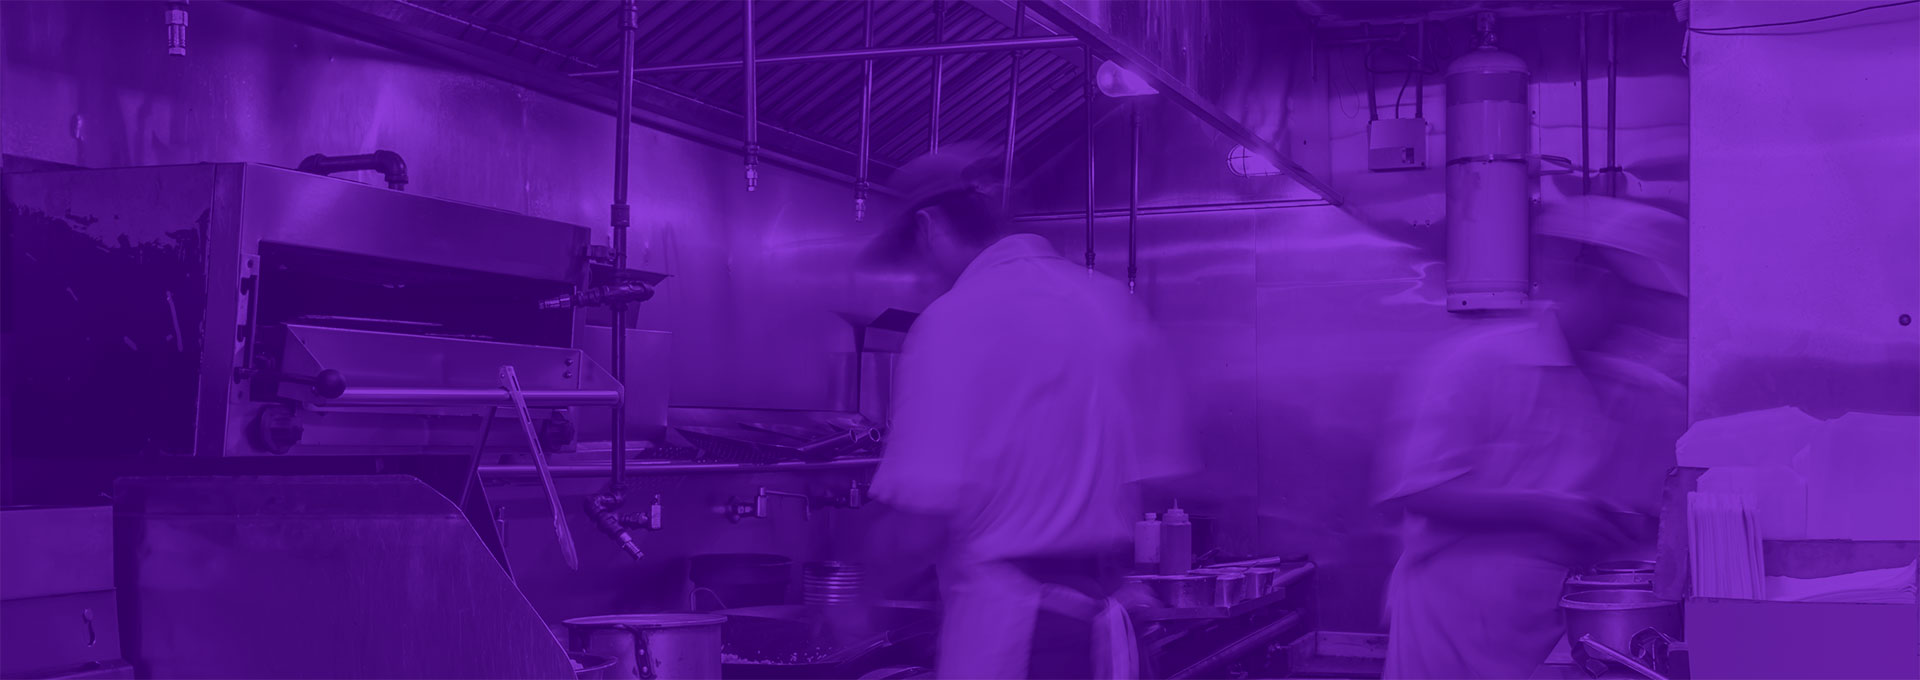 Managing Commercial Refrigeration In Restaurants for Improved Energy Efficiency